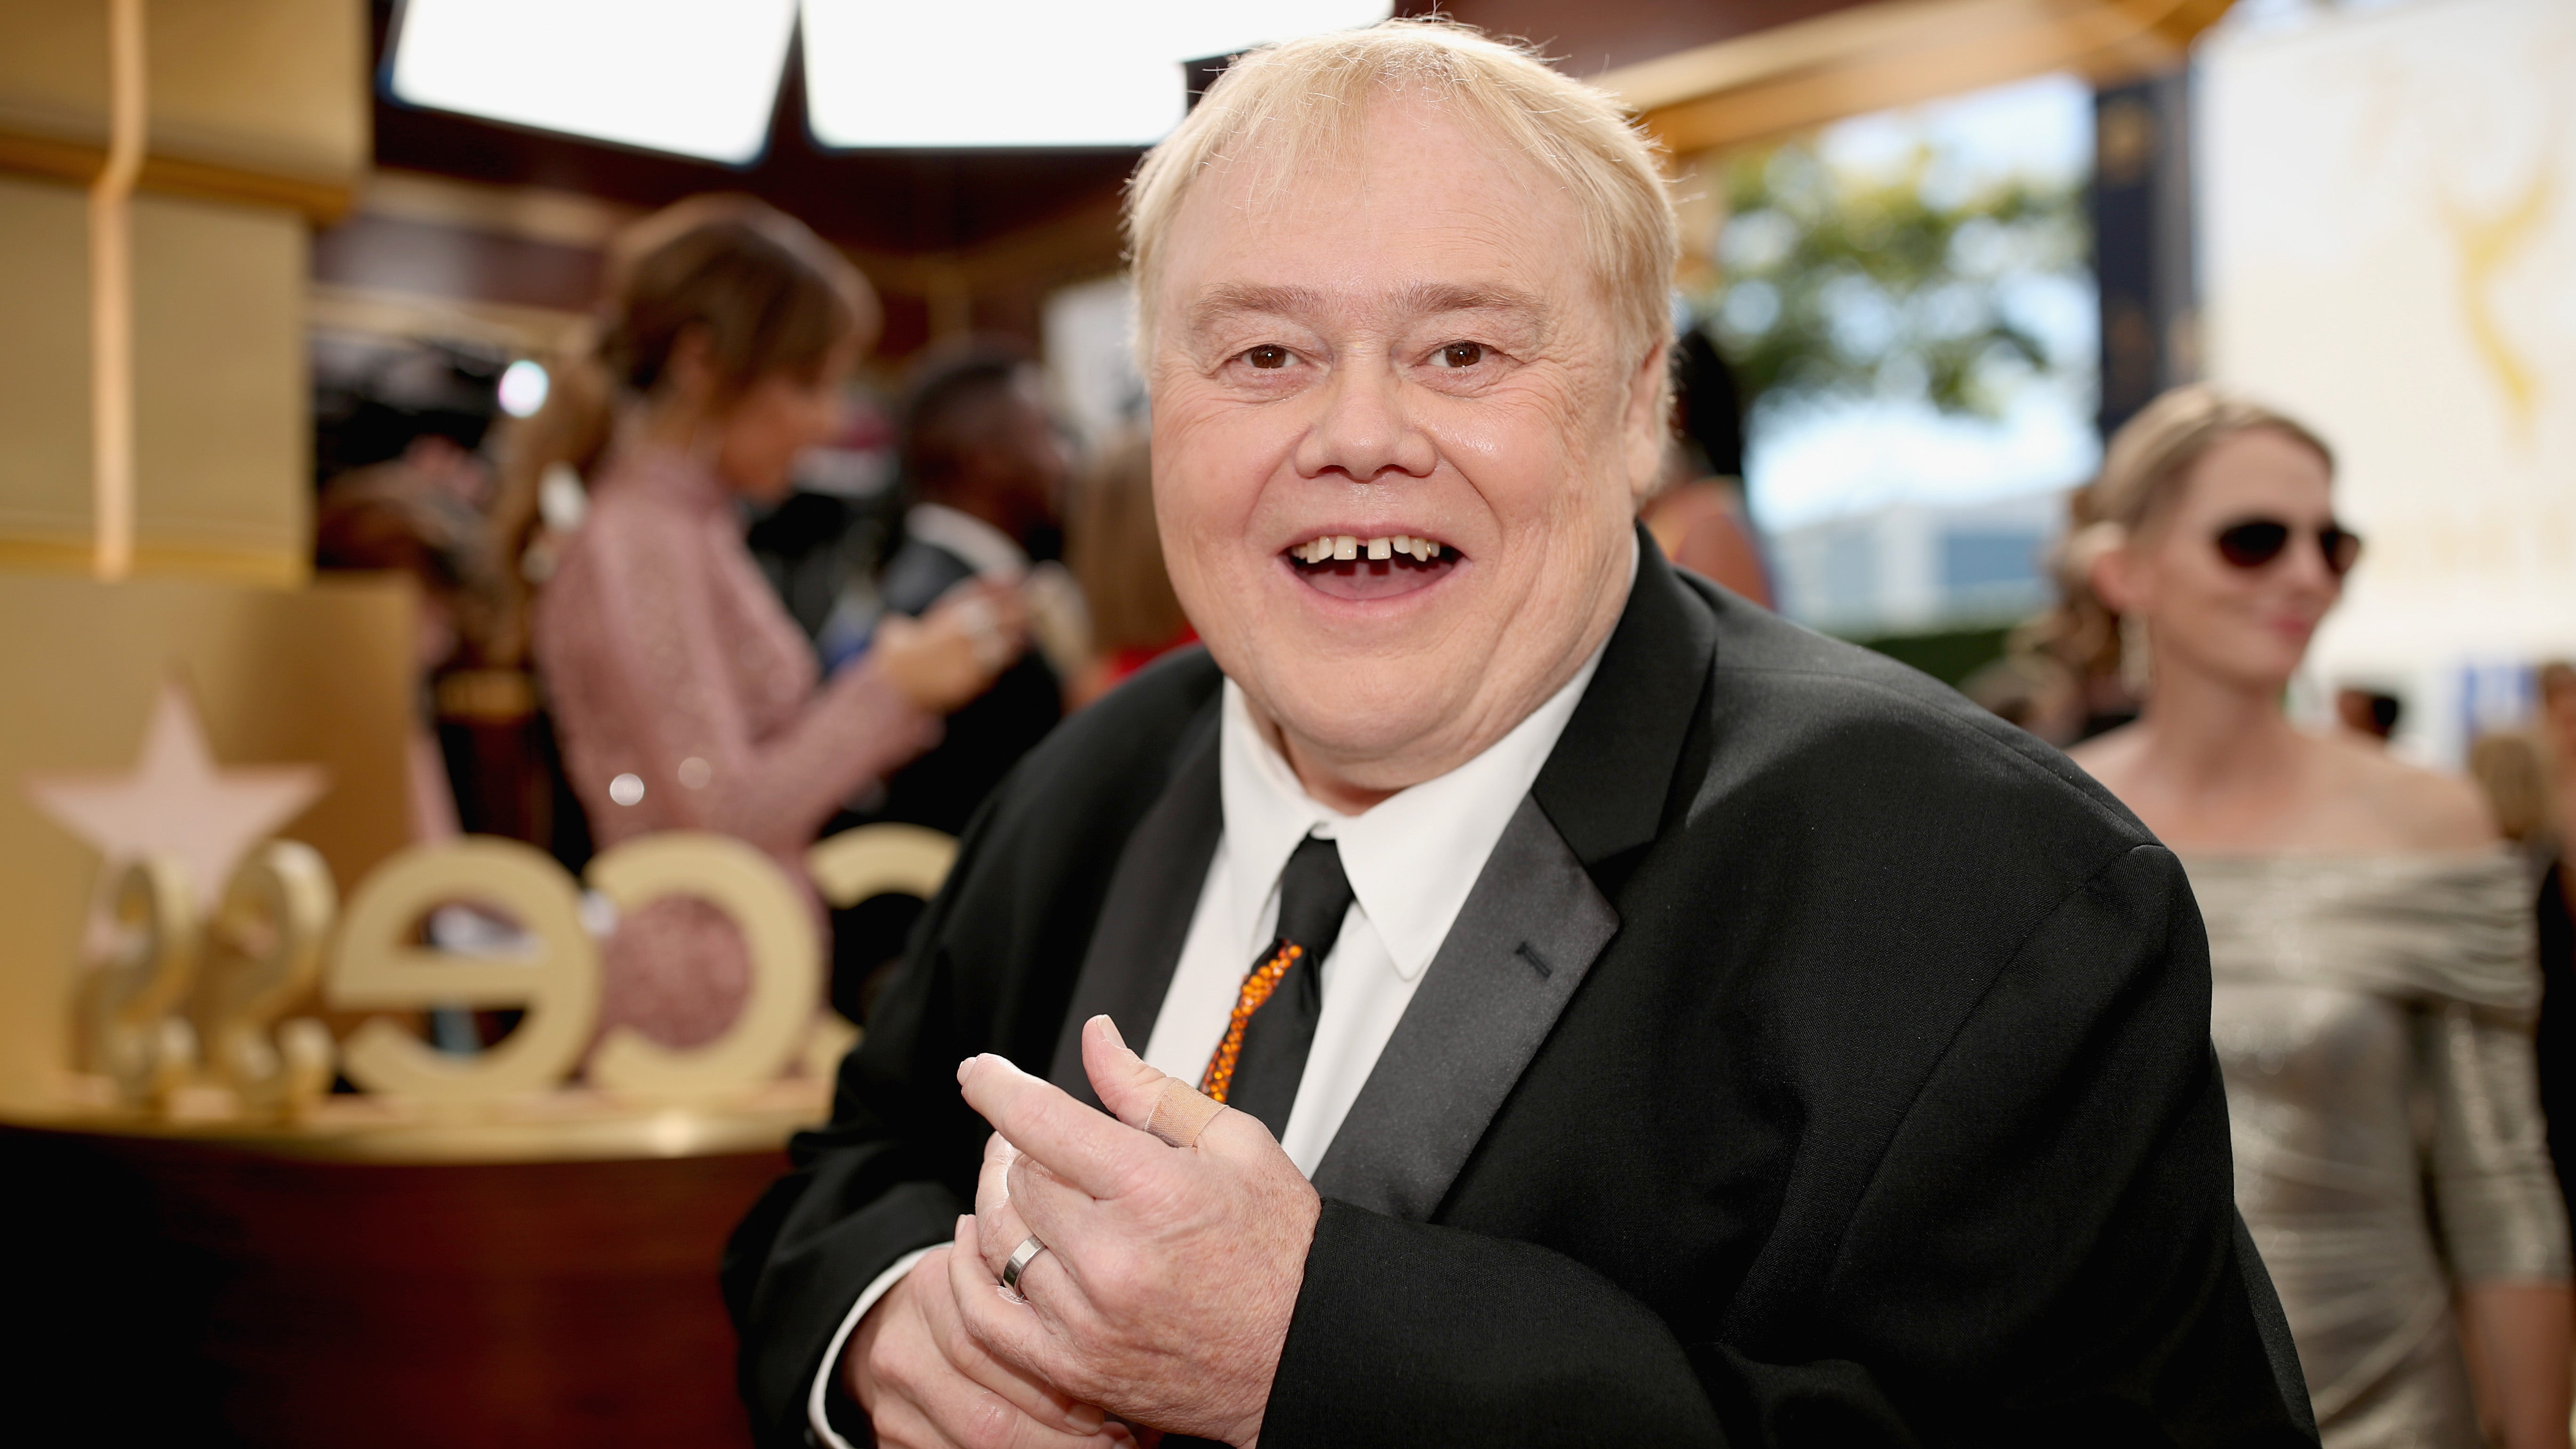 About – Louie Anderson